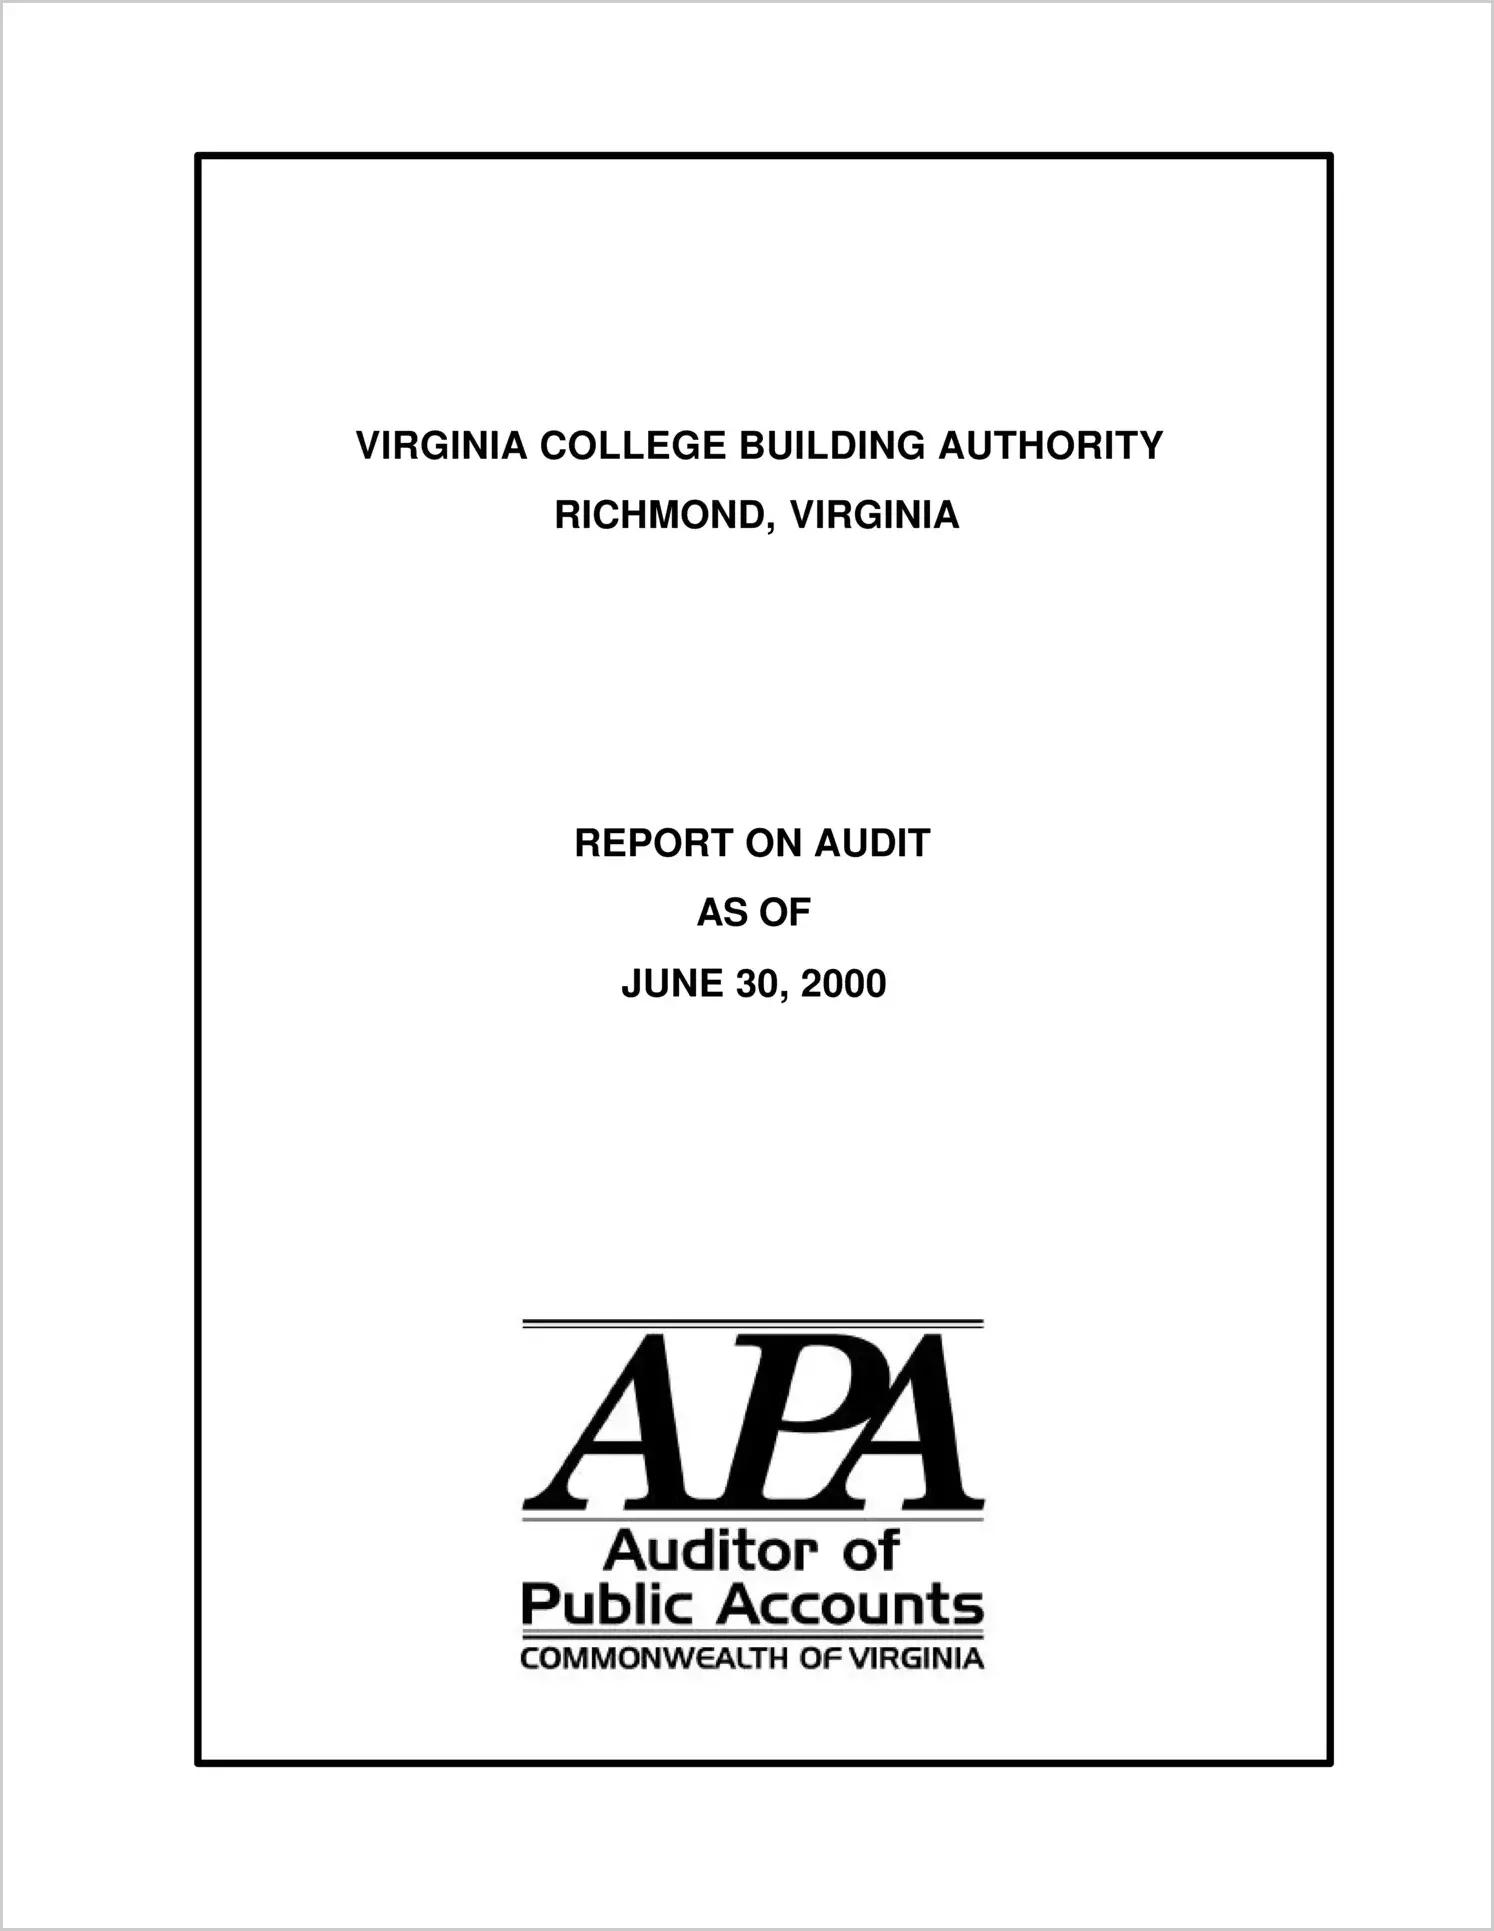 Virginia College Building Authority for the year ended June 30, 2000